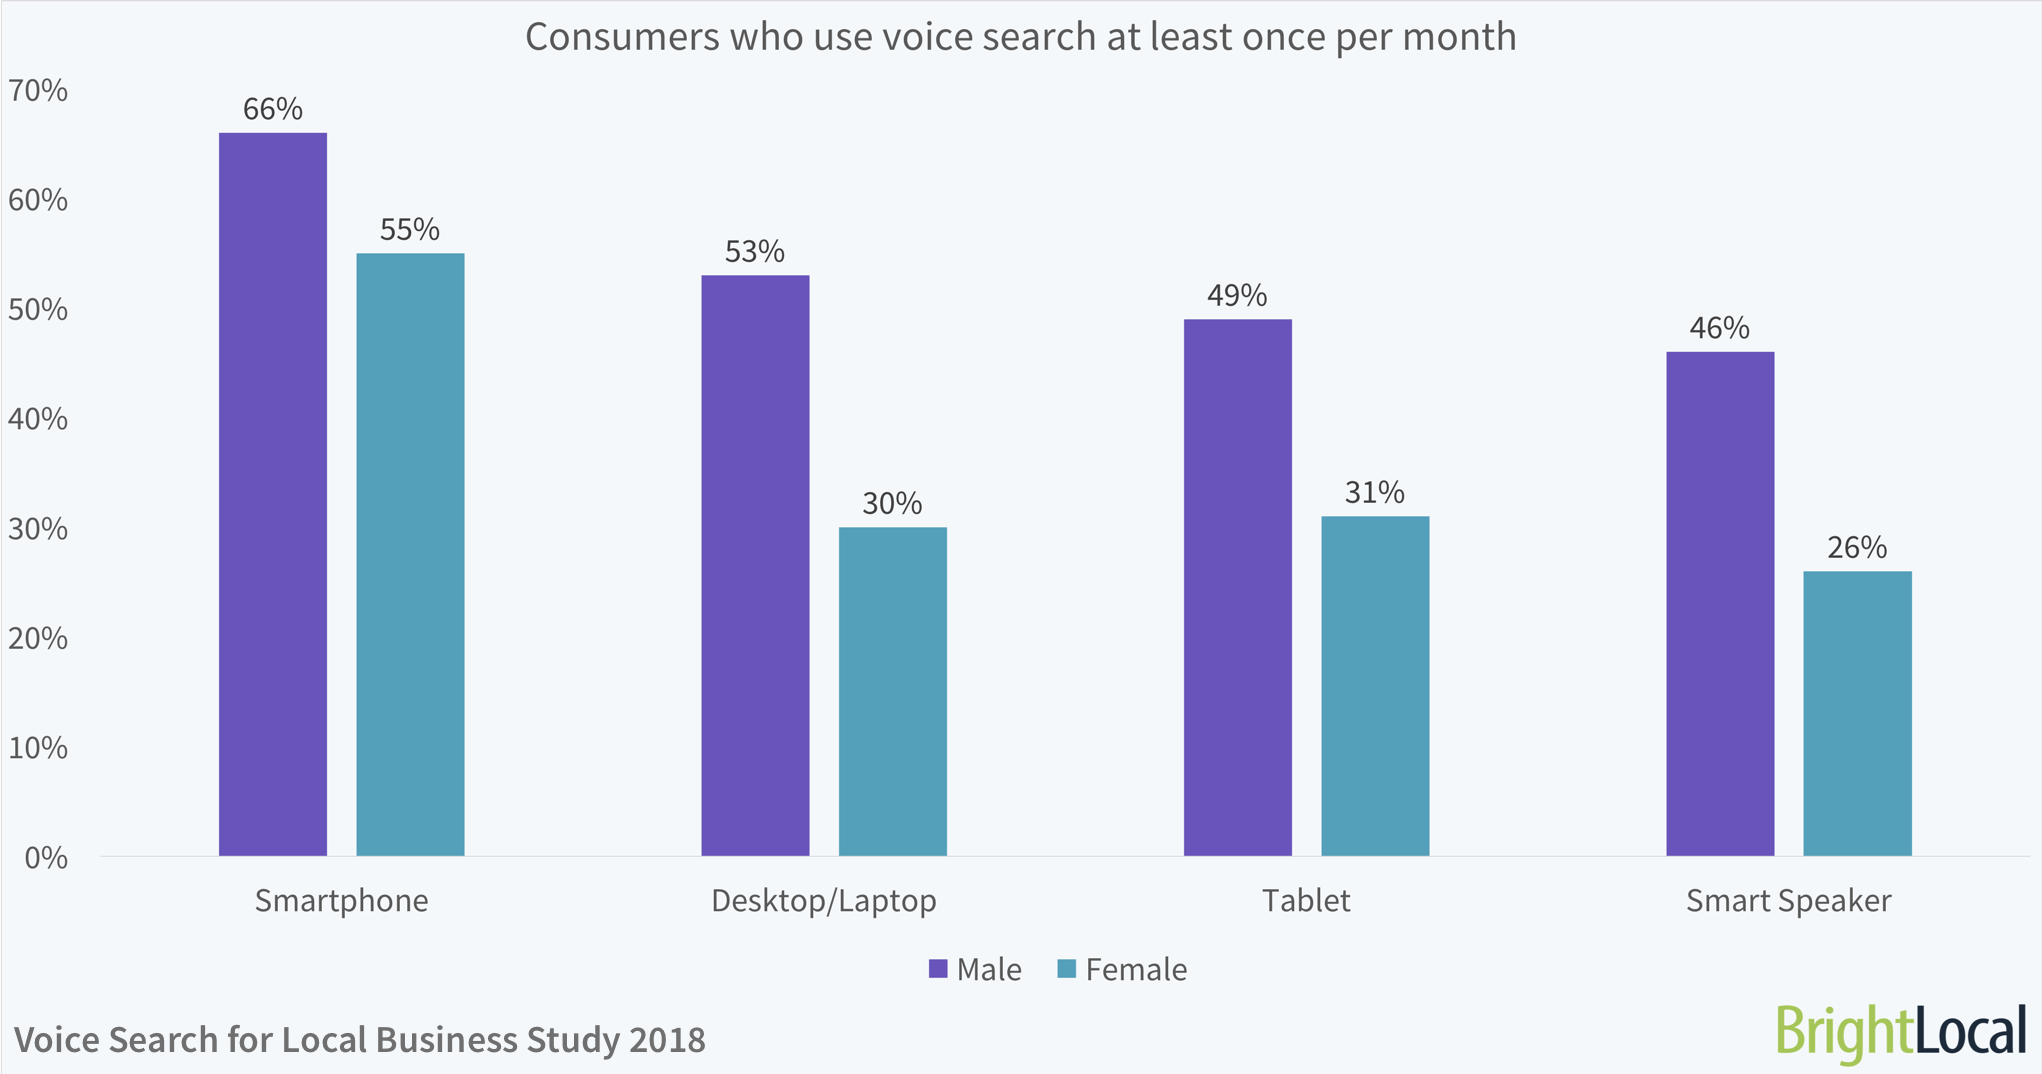 Gender: Consumers who use voice search at least once per month | BrightLocal Voice Search for Local Business Study